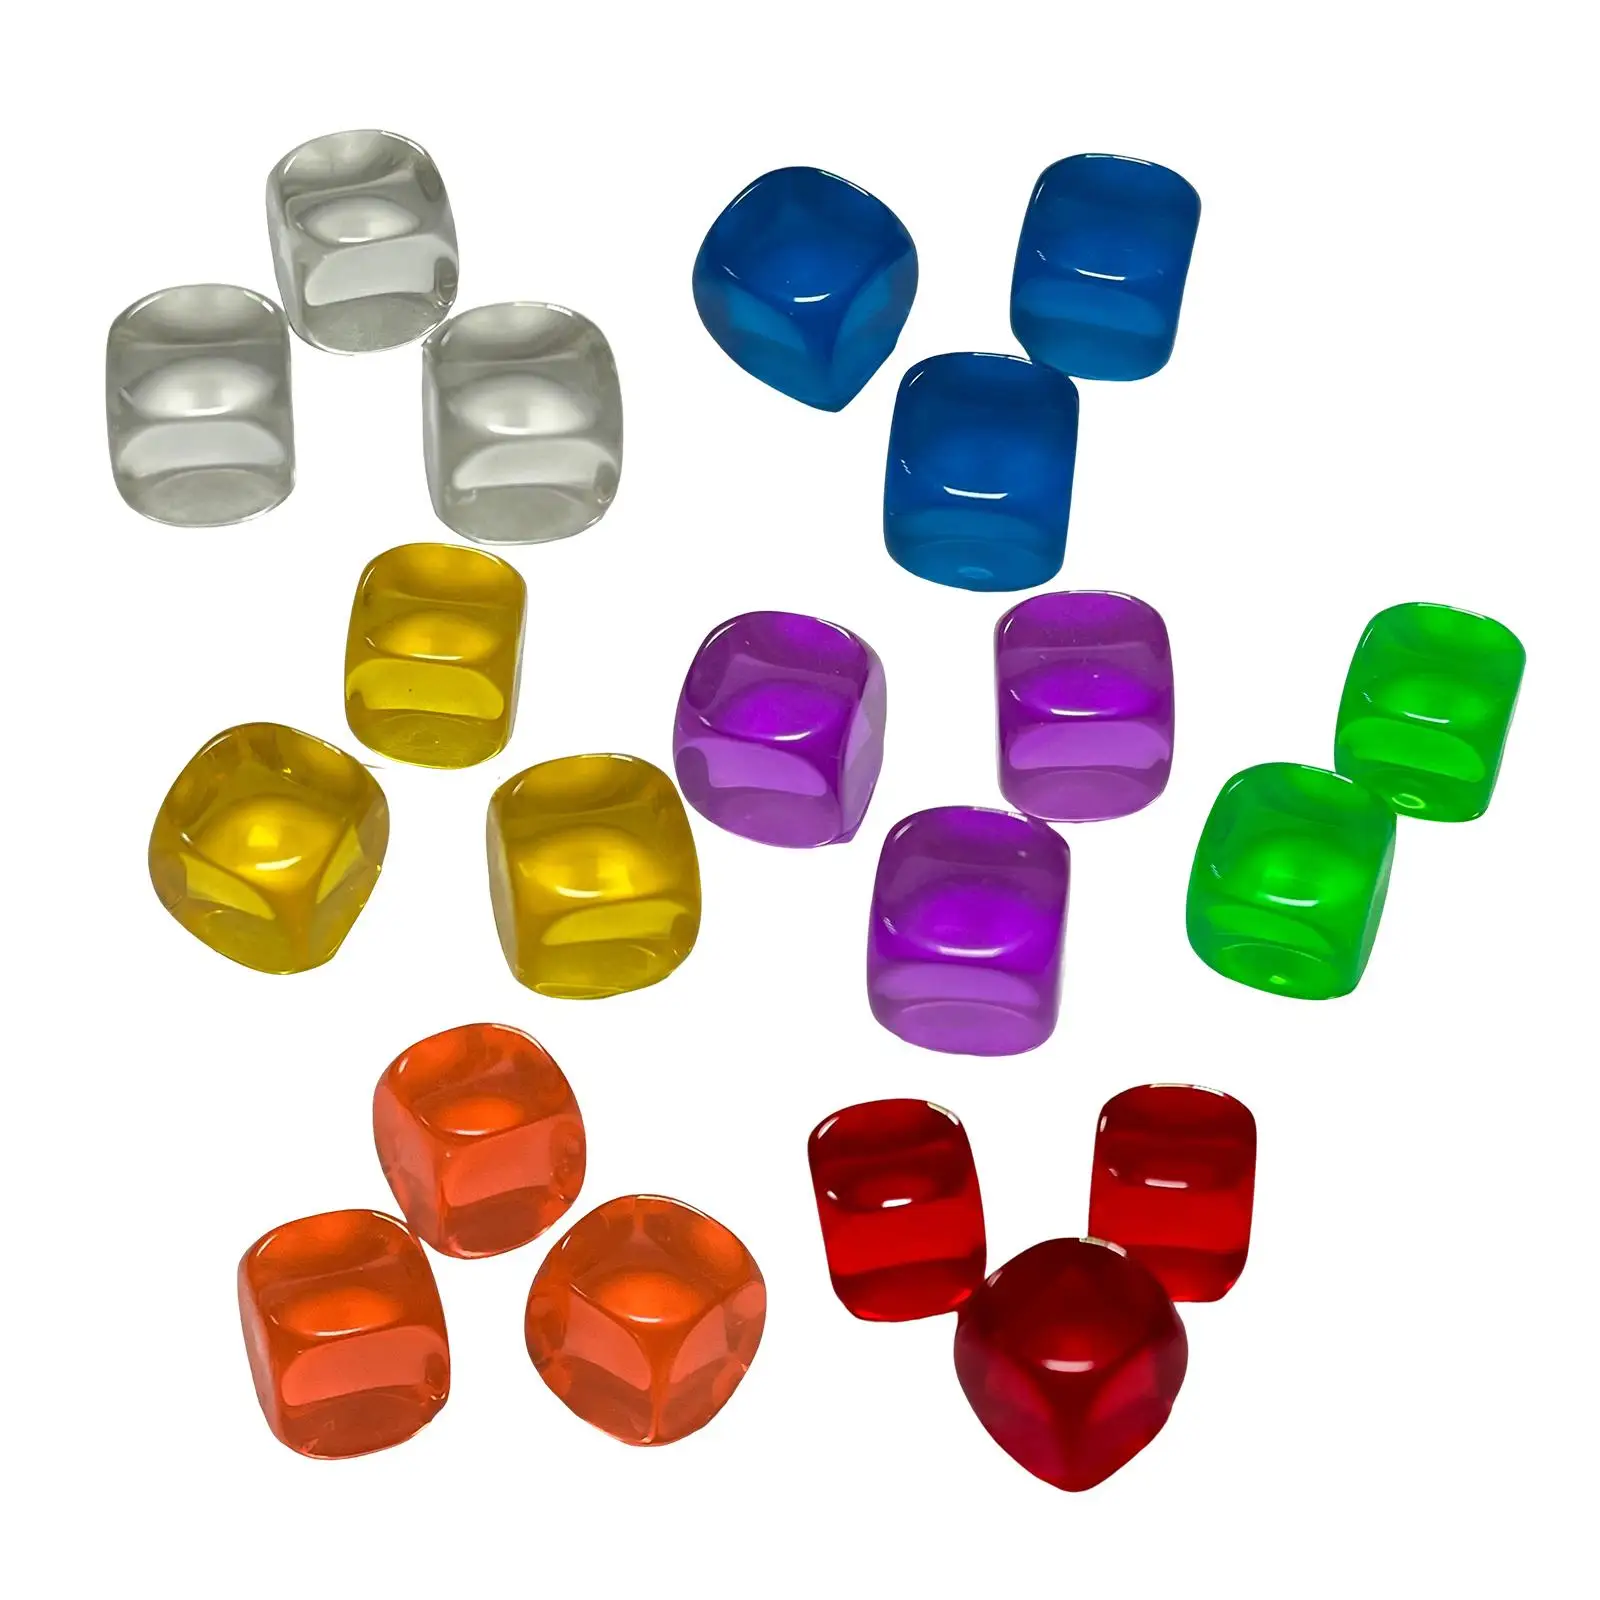 20 Pieces 16mm Blank Dices Education Markers Activity Standard for Board Game Props Crafts Desktop Game Entertainment Toys